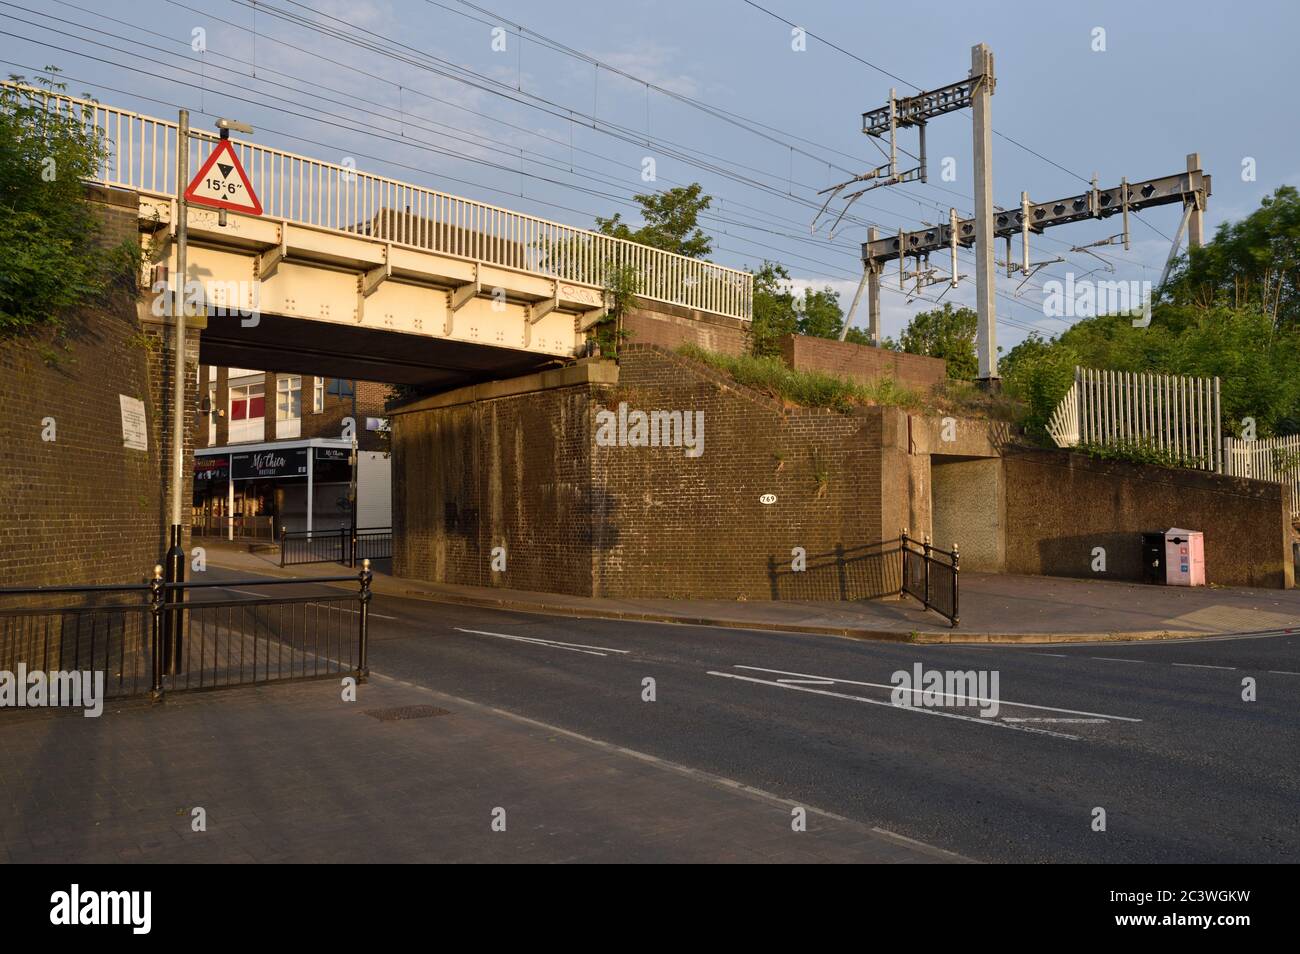 The railway bridge (No 769) which crosses the High Street on the corner of Station Approach at Wickford, Essex. Stock Photo